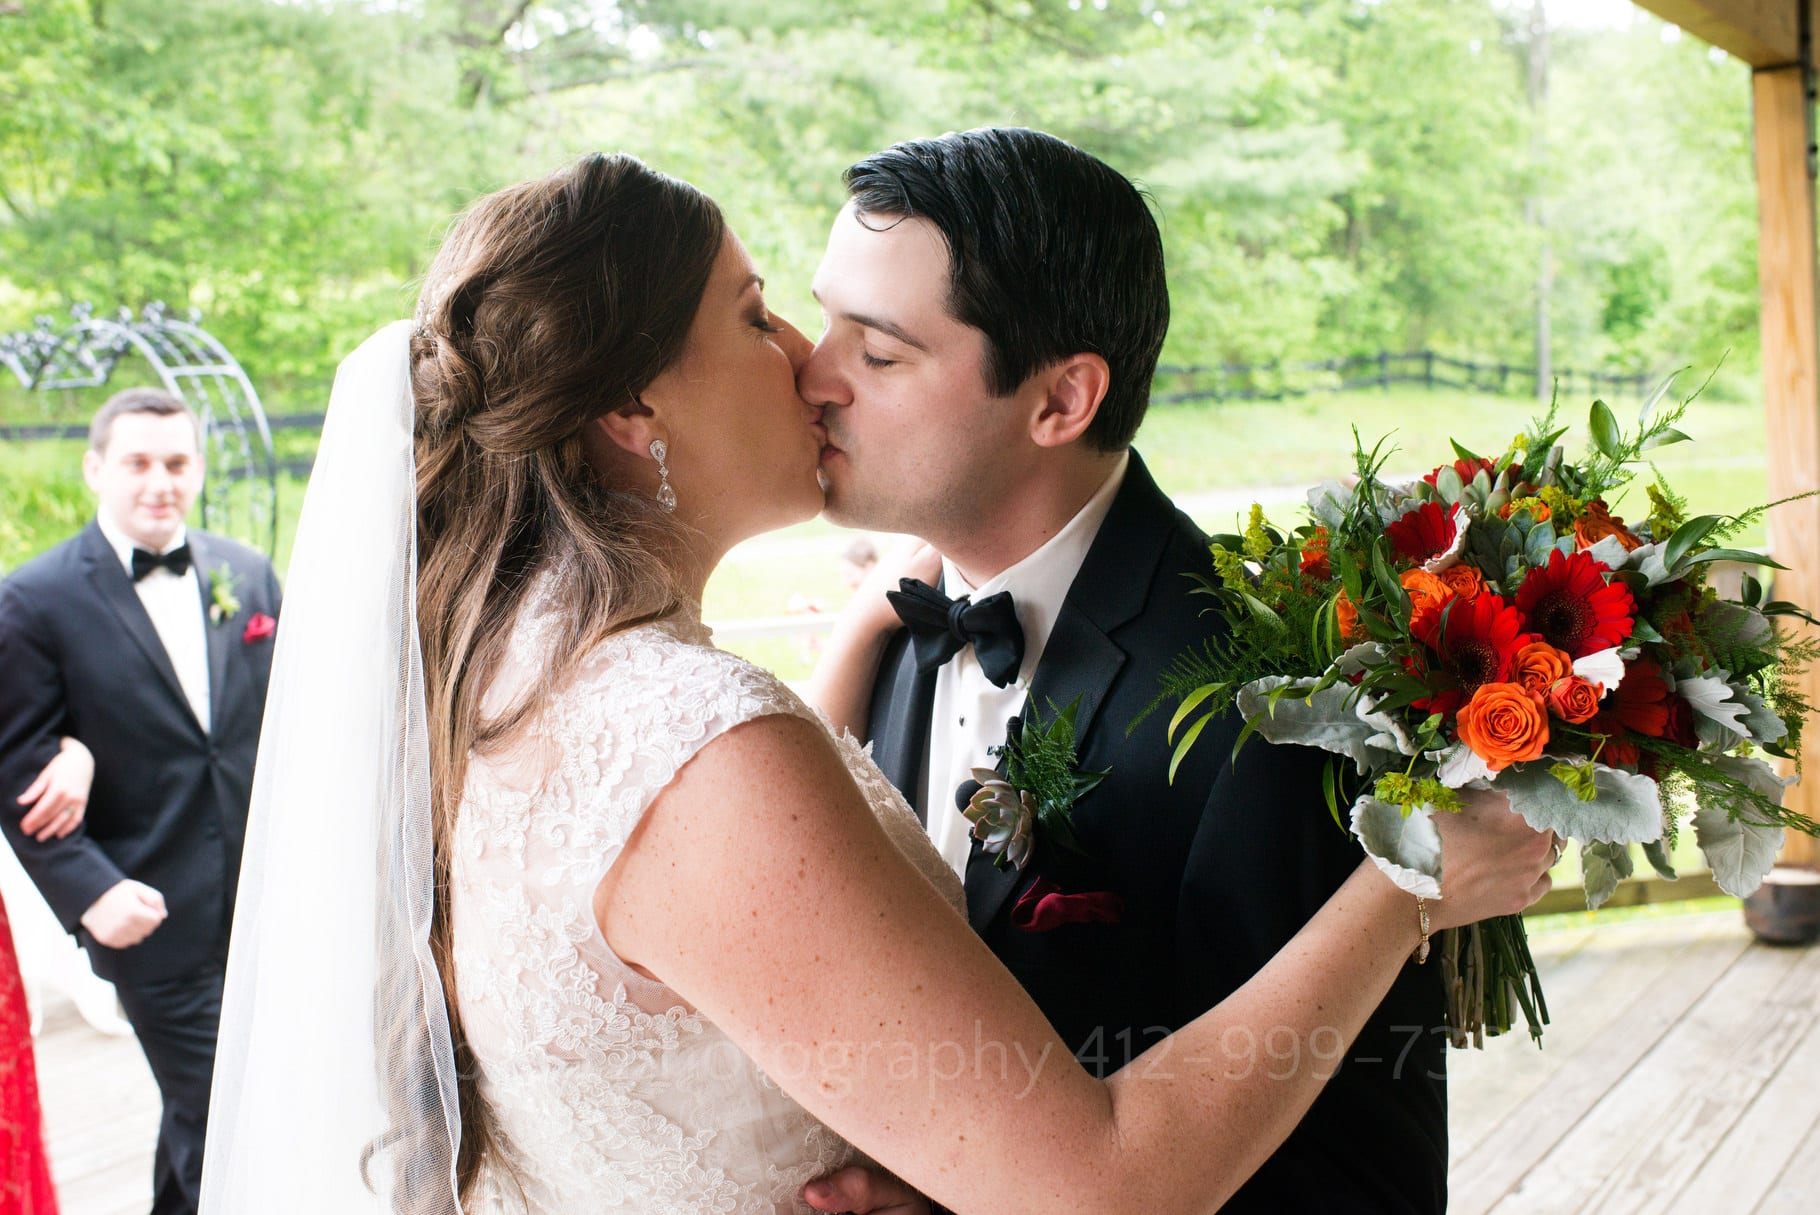 bride and groom embrace and kiss immediately after their wedding. the bride is holding a red and orange bouquet during their Chanteclaire Farm Wedding.